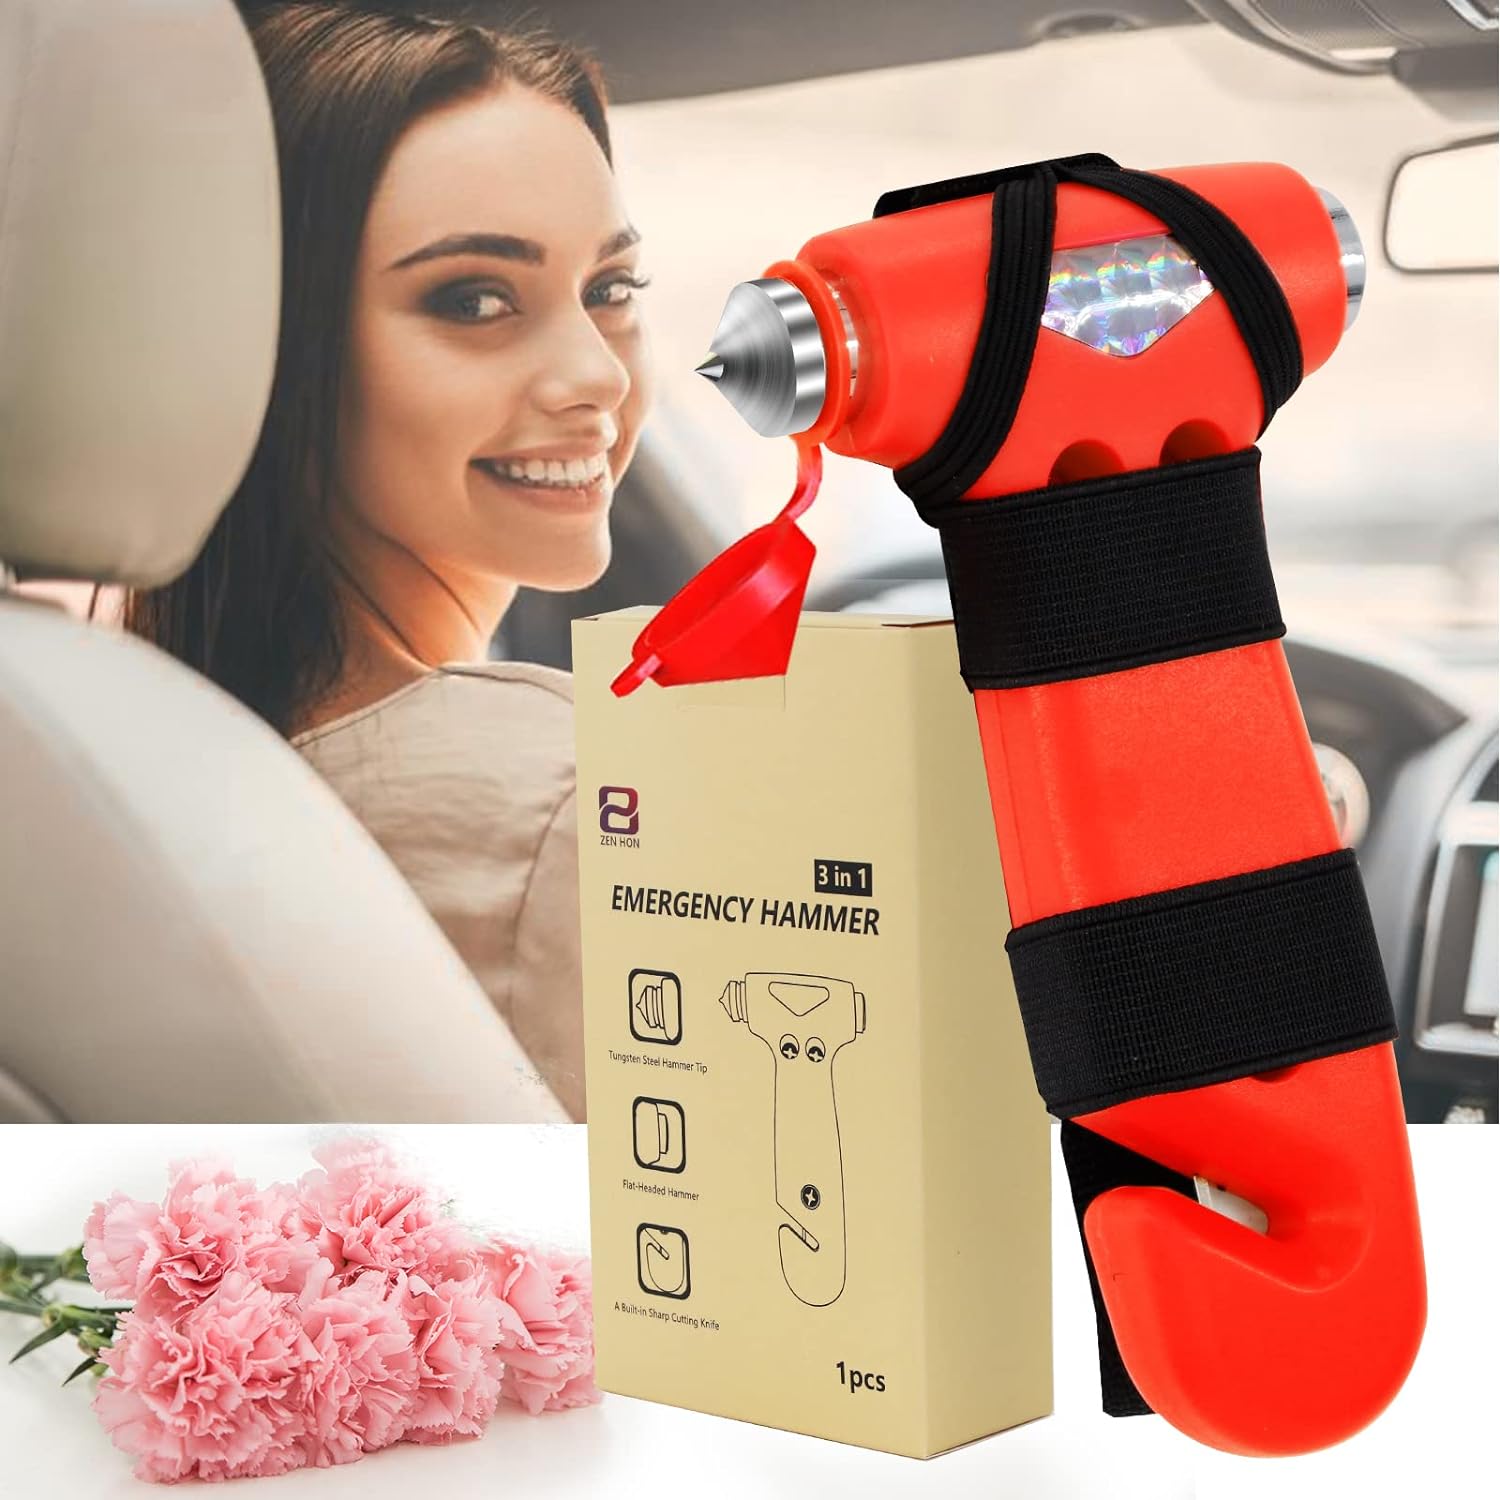 ZEN HON Car Safety Hammer for Lady, Red 3-in-1 Emergency Escape Tool with Window Breaker and Seat Belt Cutter, Safety Emergency Car Escape Tool Gift for Family